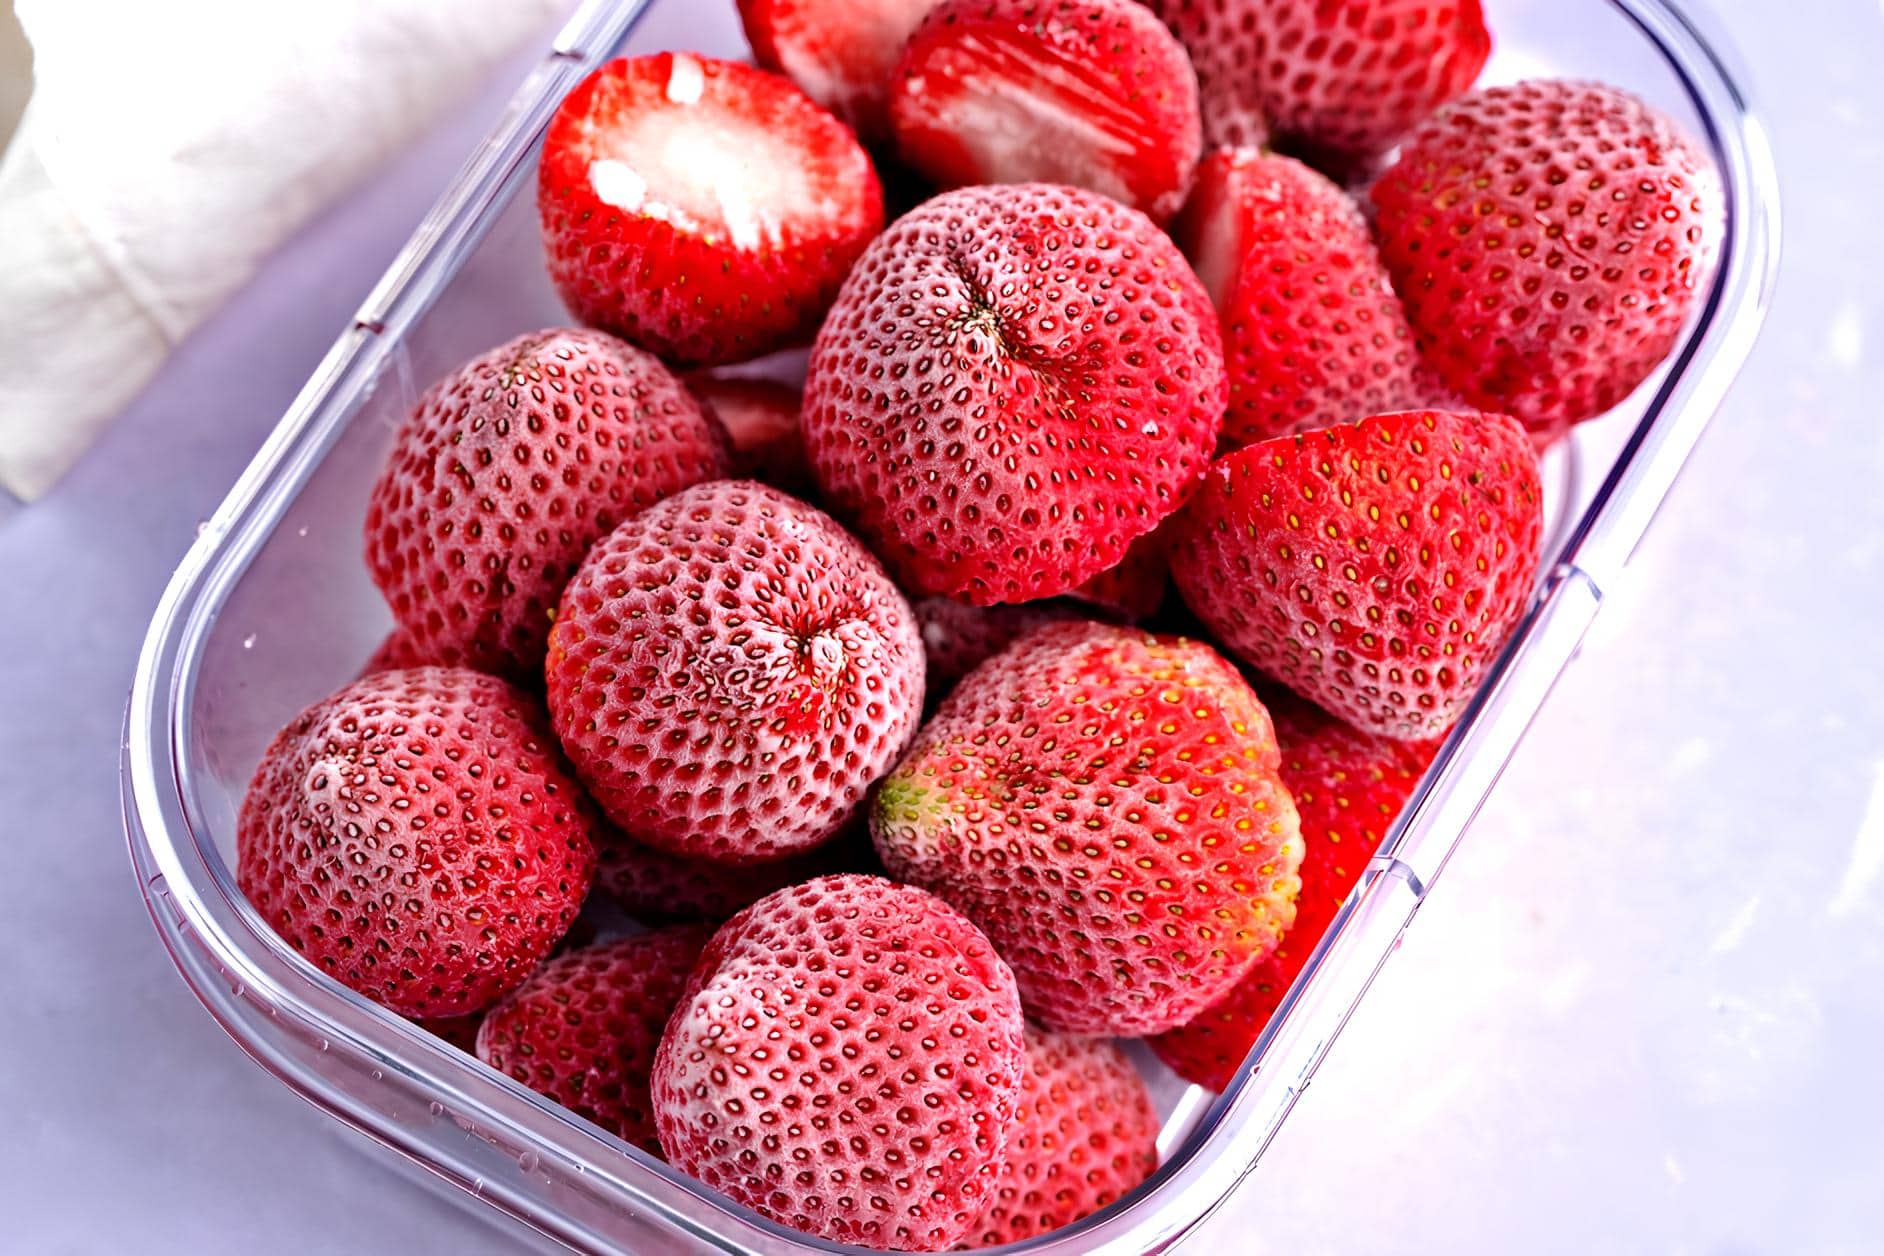 Frozen Strawberries in a Plastic Container